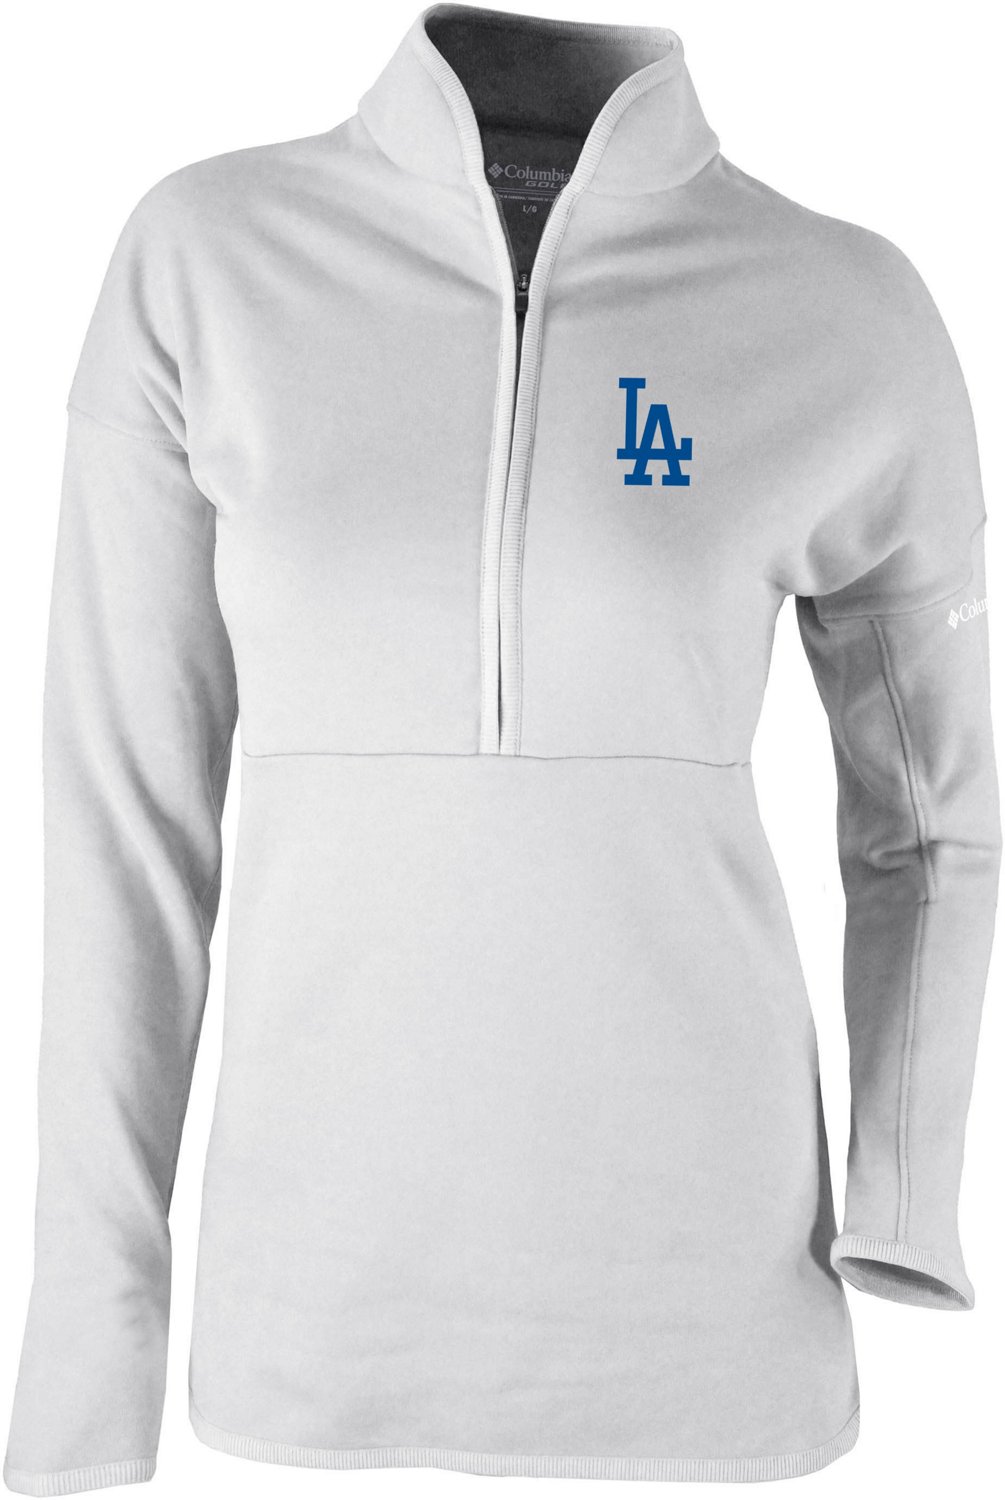 Columbia Sportswear Men's Los Angeles Dodgers Flash Challenger Windbreaker Jacket Grey, Large - MLB Outerwear Adult/Youth at Academy Sports